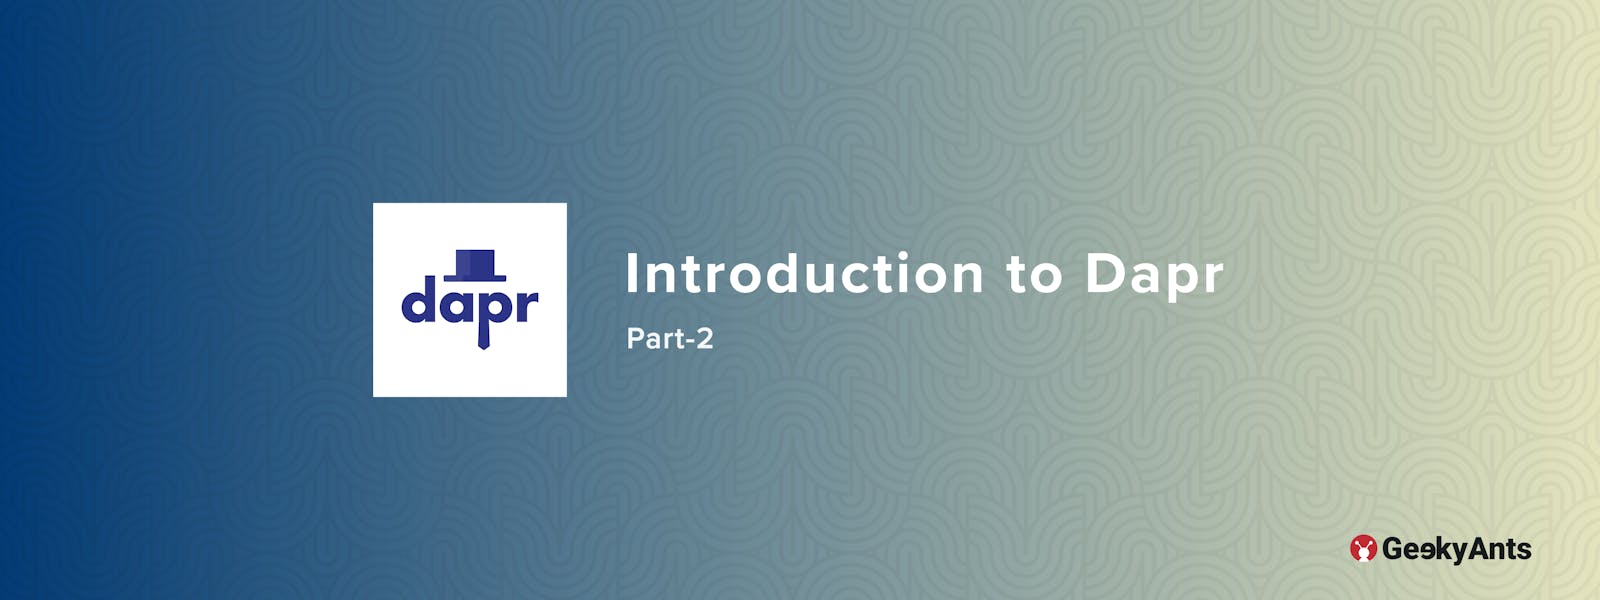 Introduction to Dapr Part-2